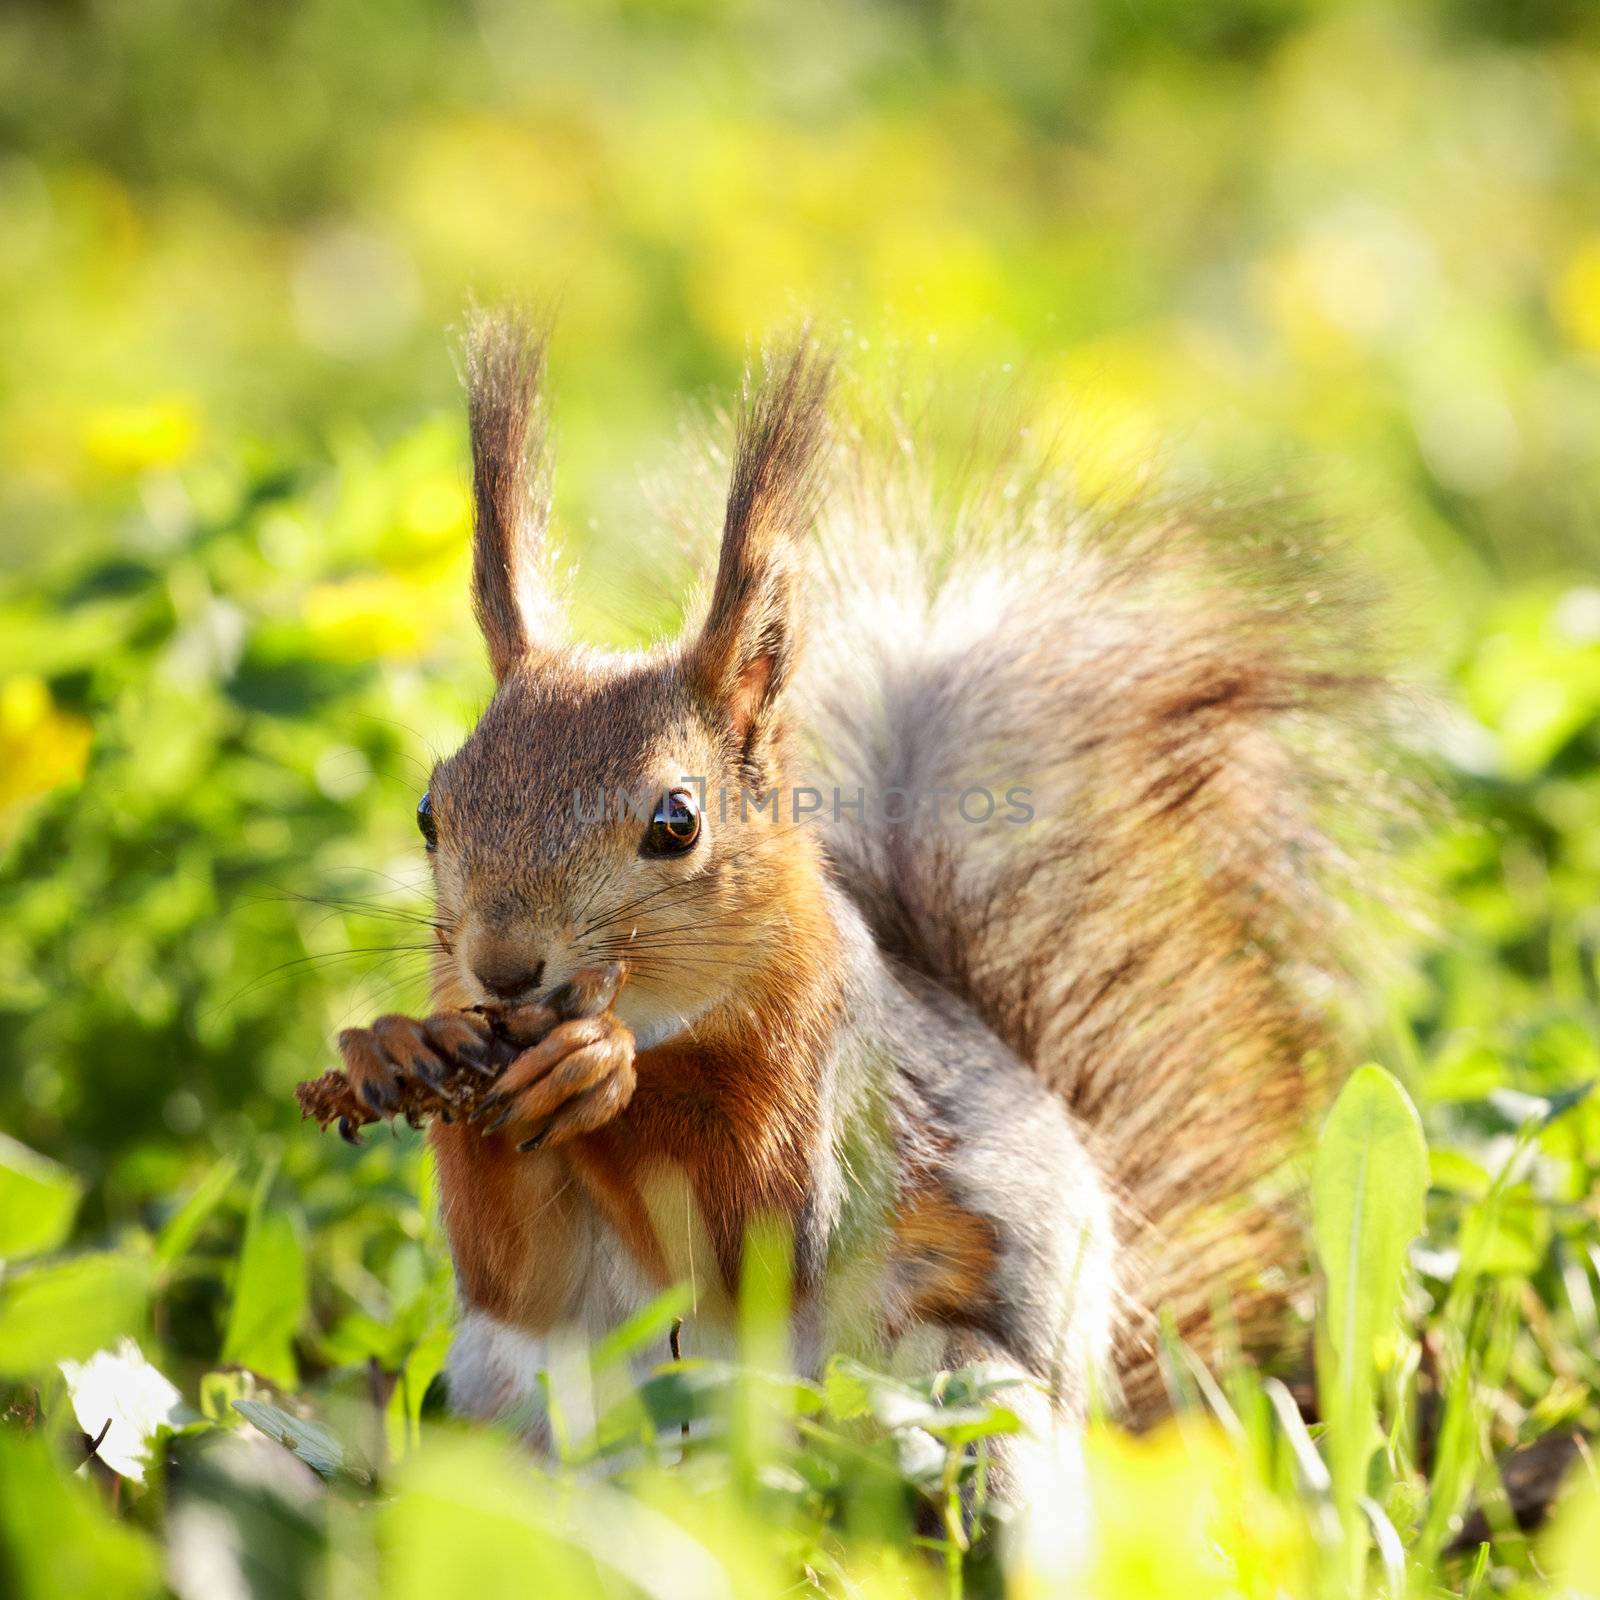 Squirrel with Pinecone by petr_malyshev